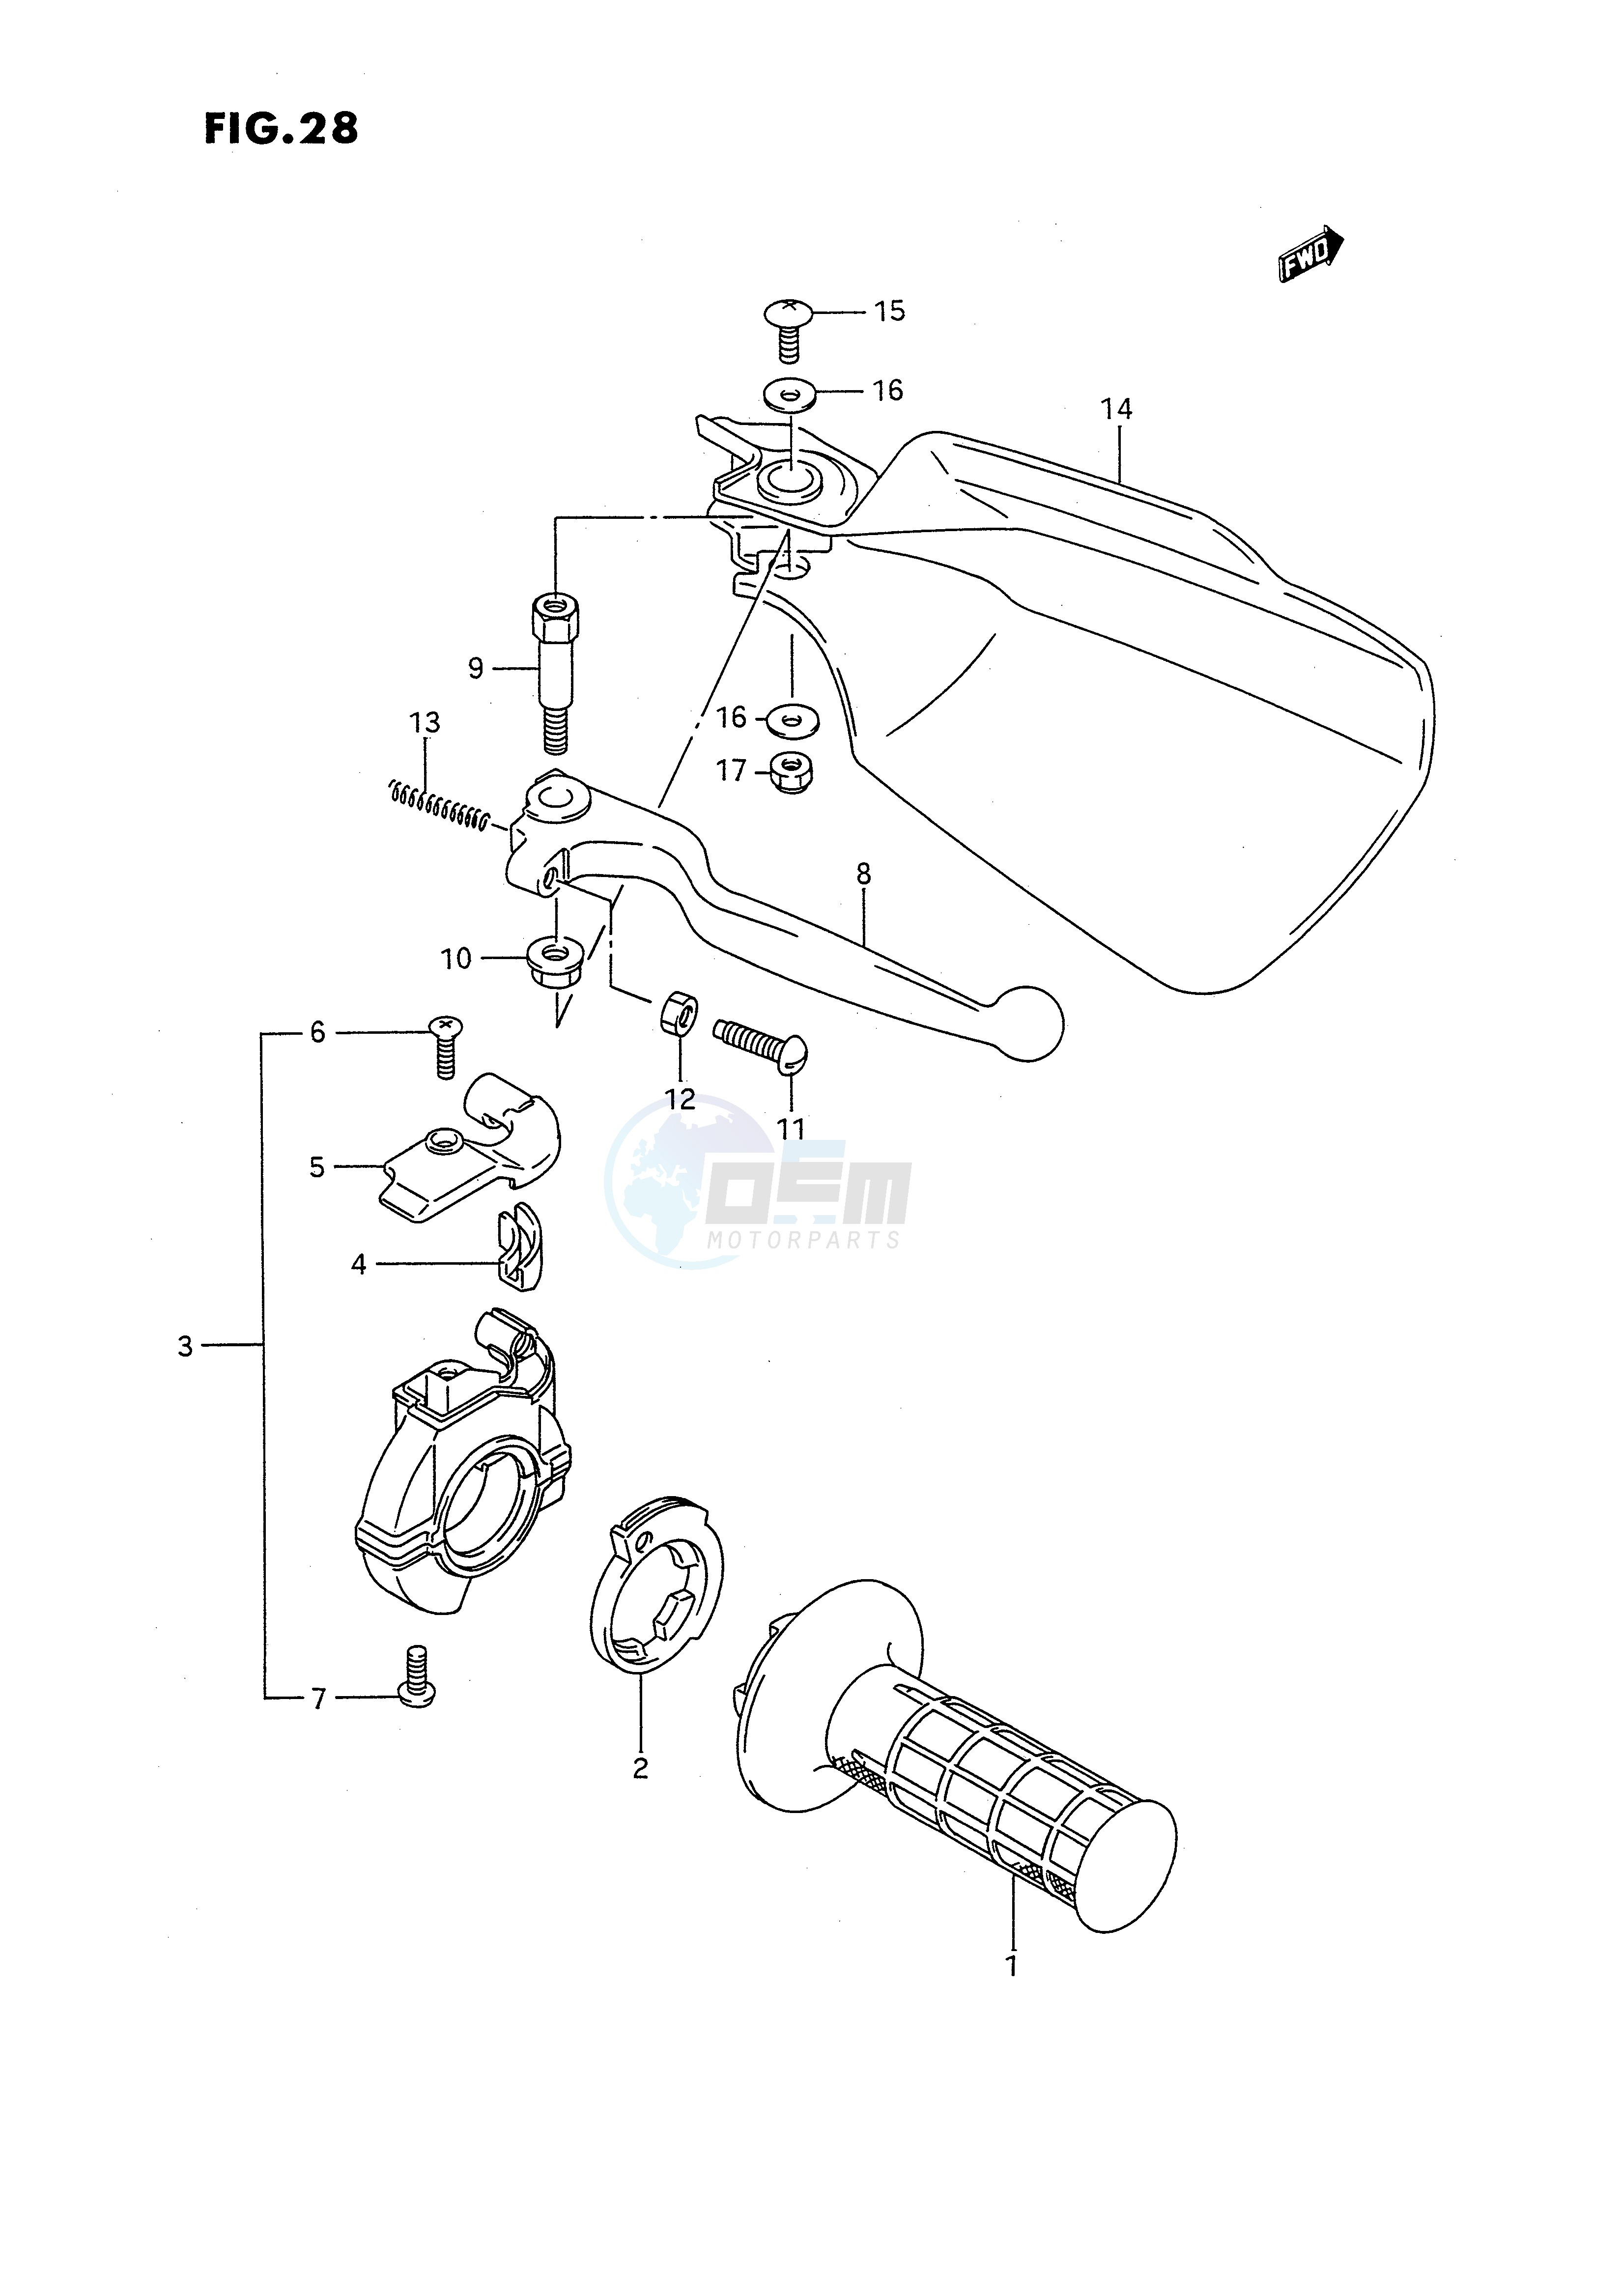 RIGHT KNUCKLE COVER (MODEL K L M) blueprint